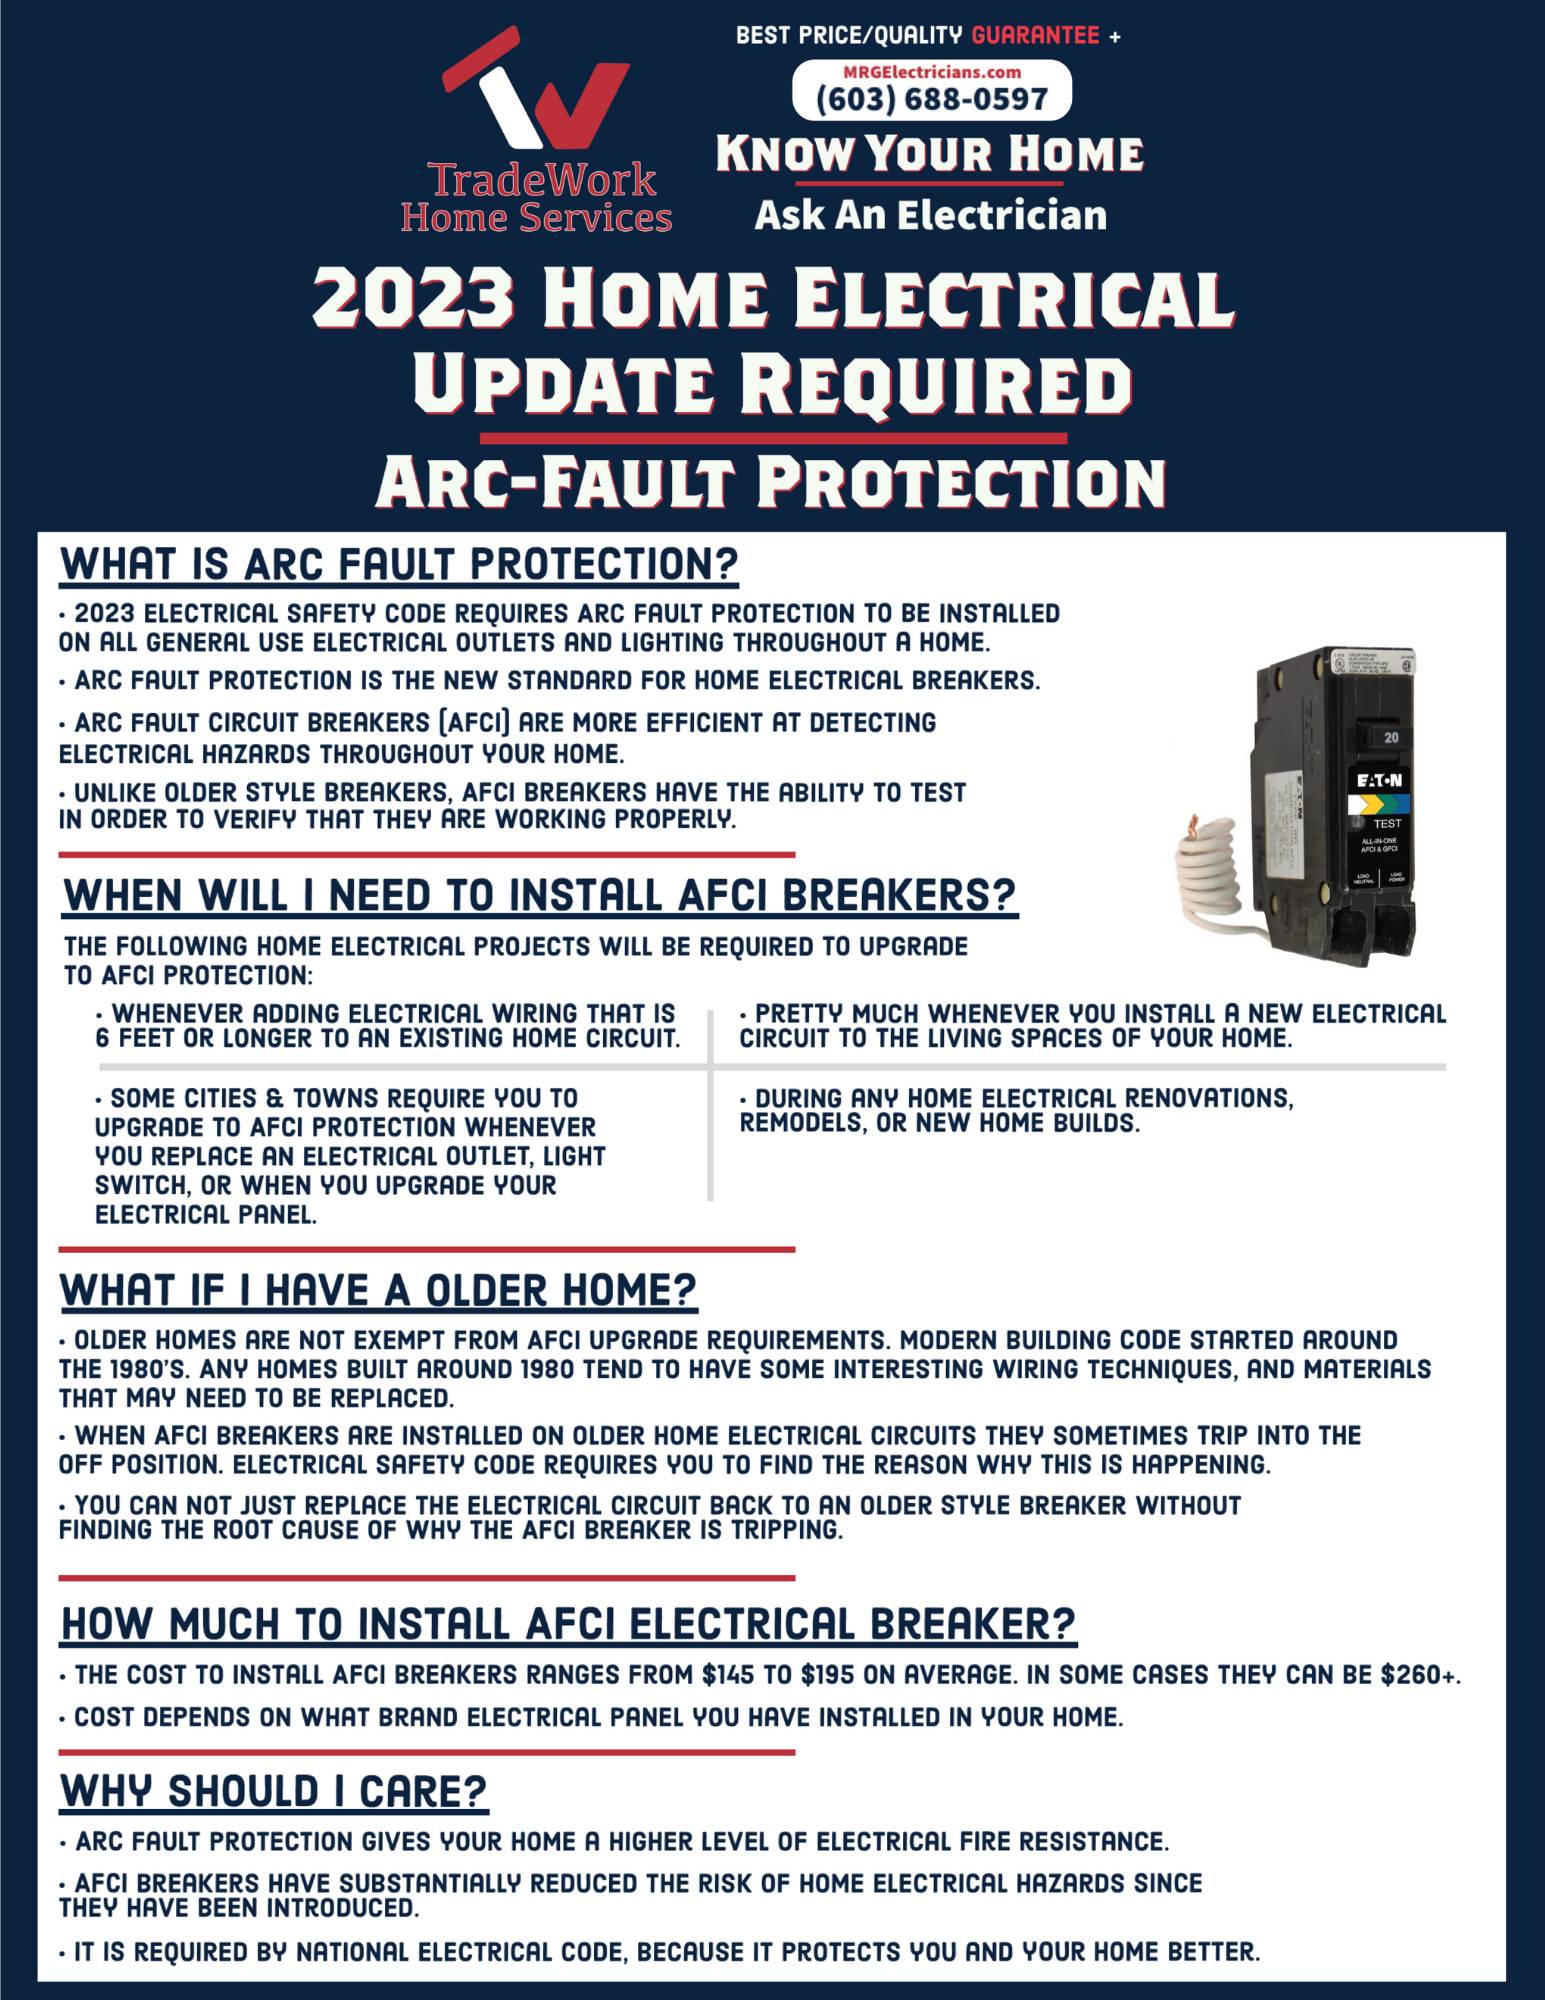 Home electrical Arc fault protection explained with install locations